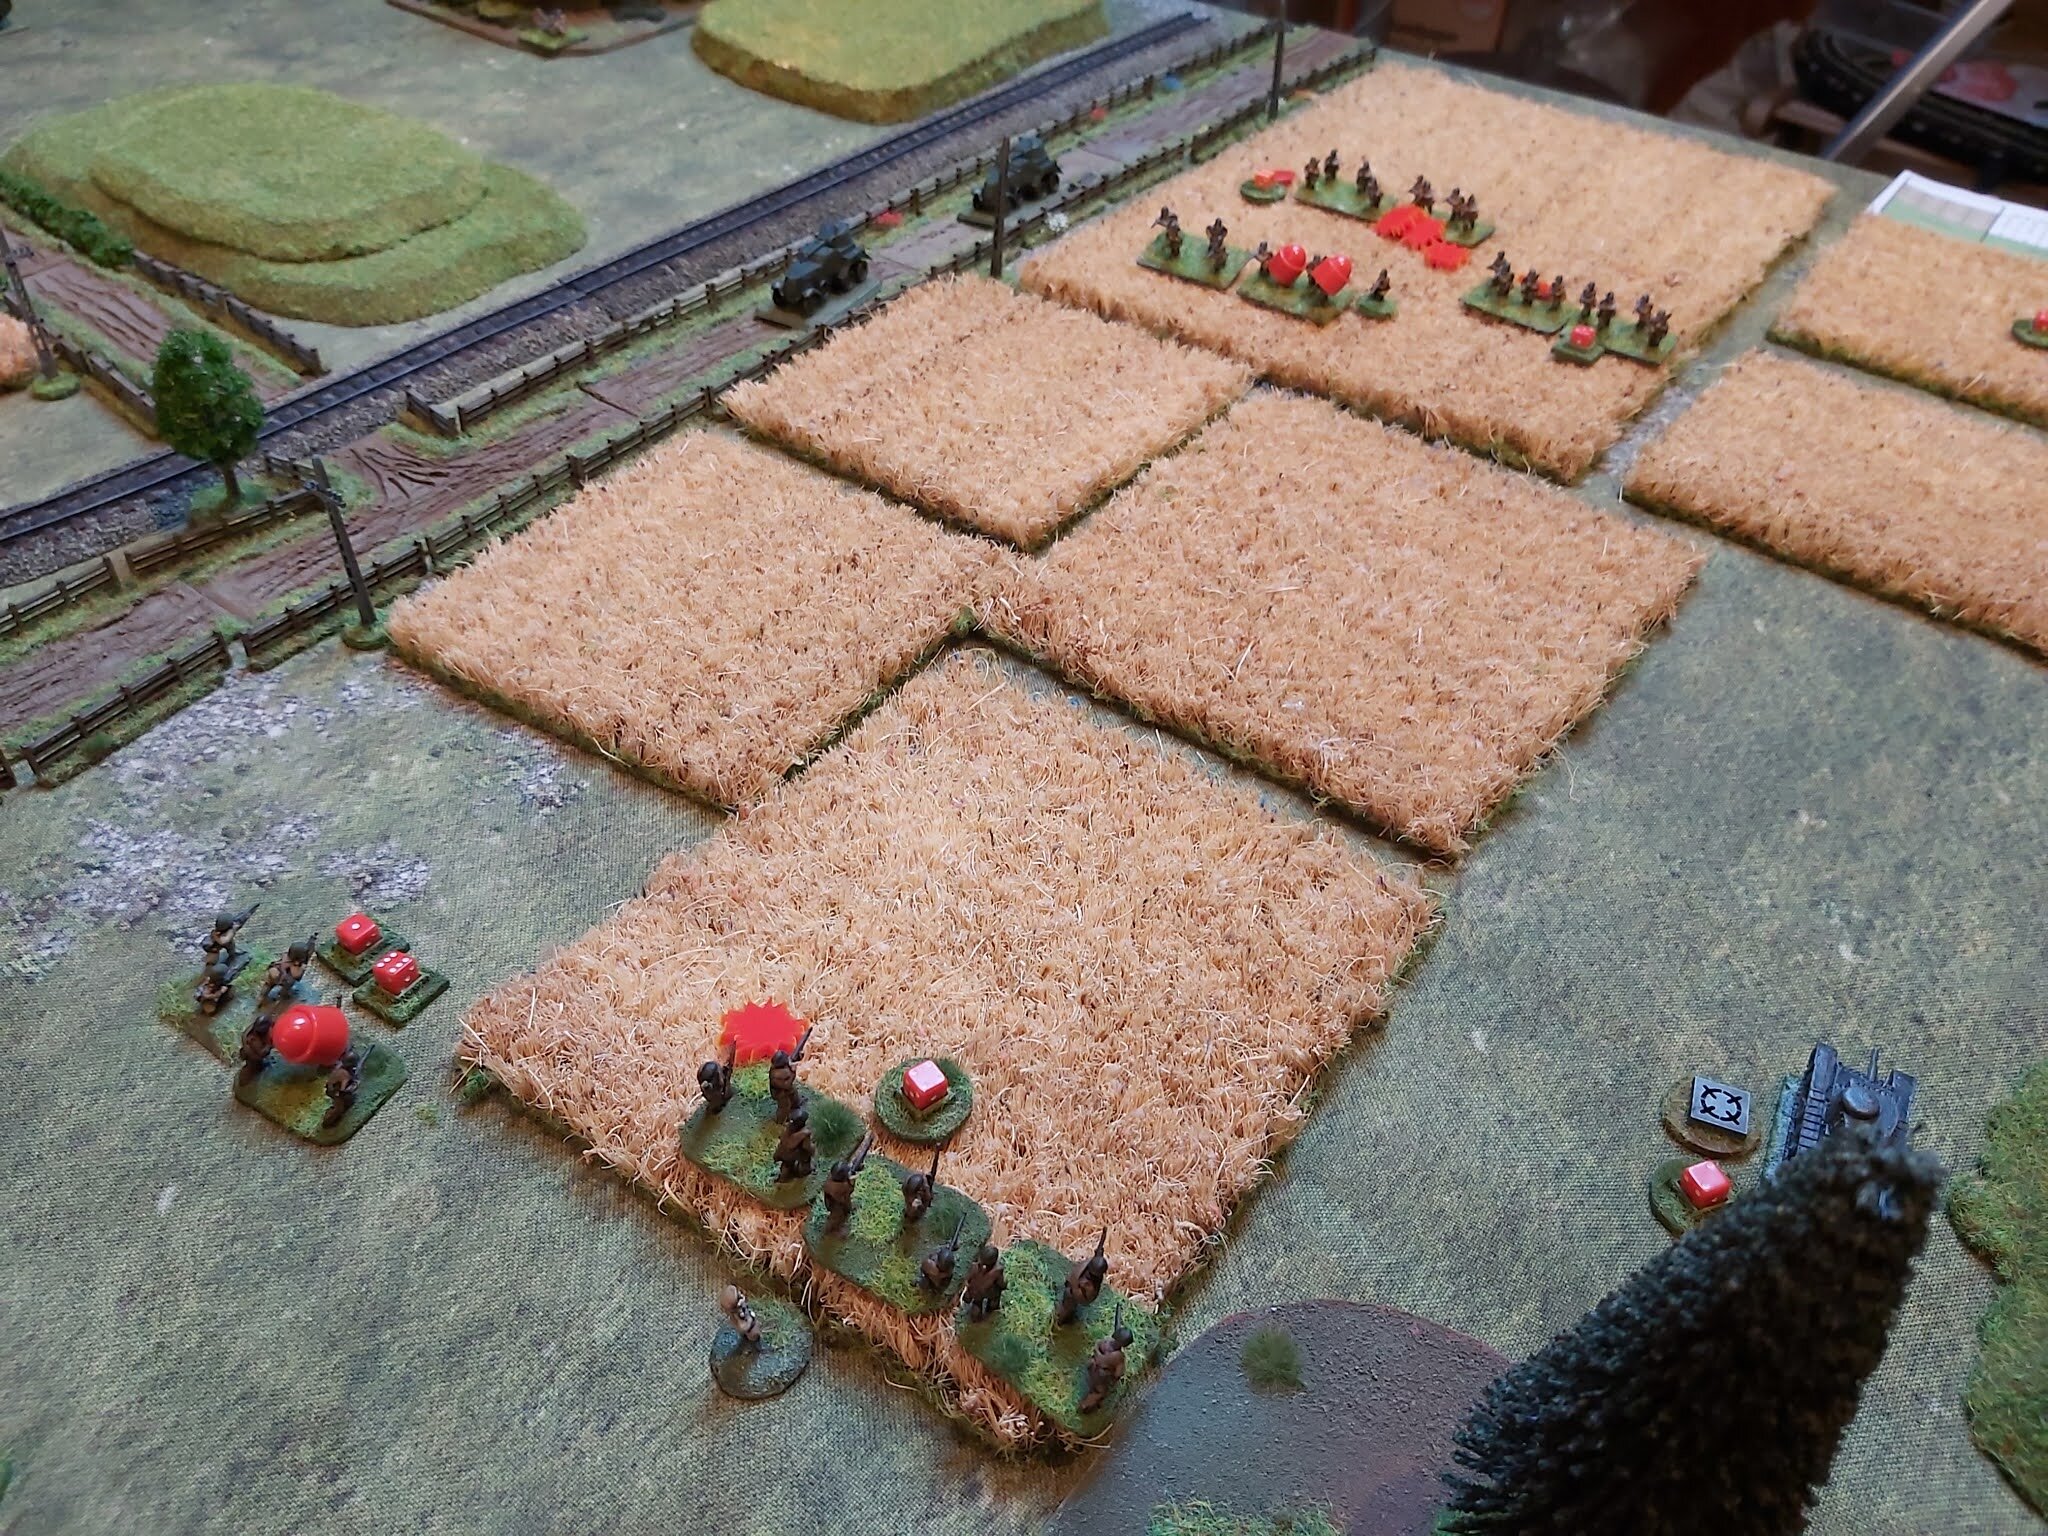 As the firefight continued on the other flank, the Romanians were pressing their advantage, despite taking heavy casualties. 